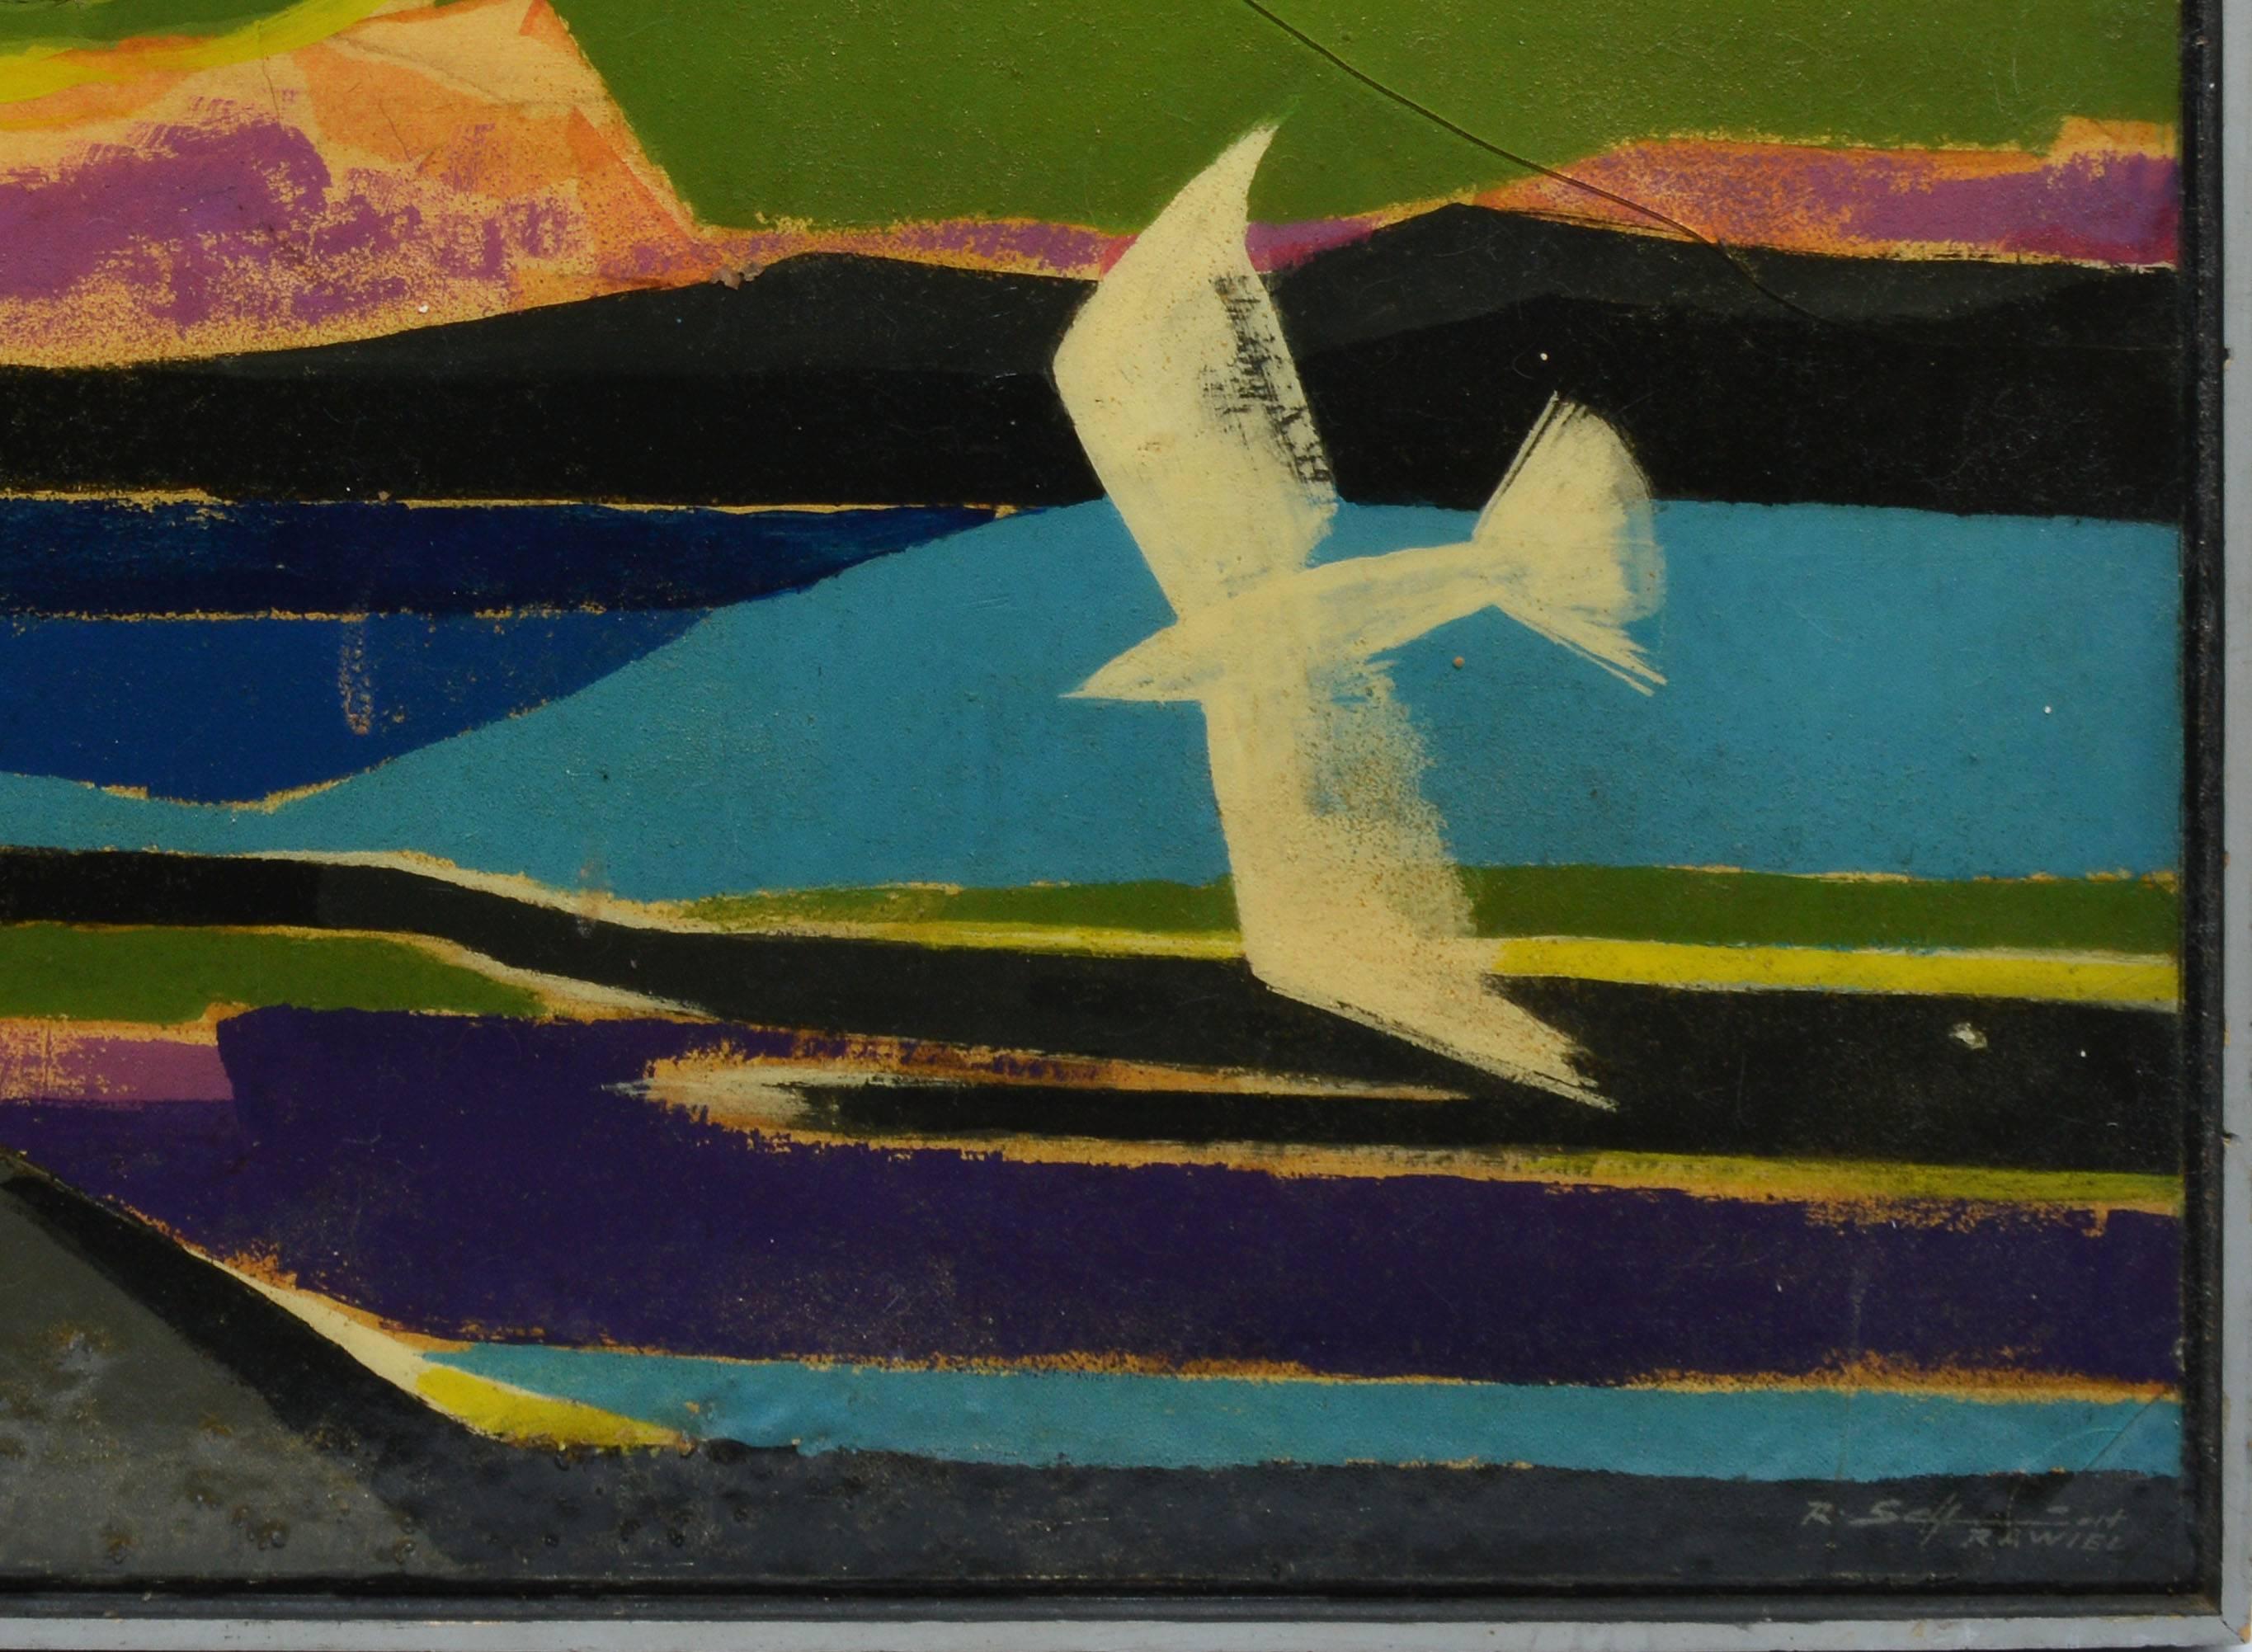 Modernist Abstracted Landscape with Flying Bird - Black Abstract Painting by Unknown